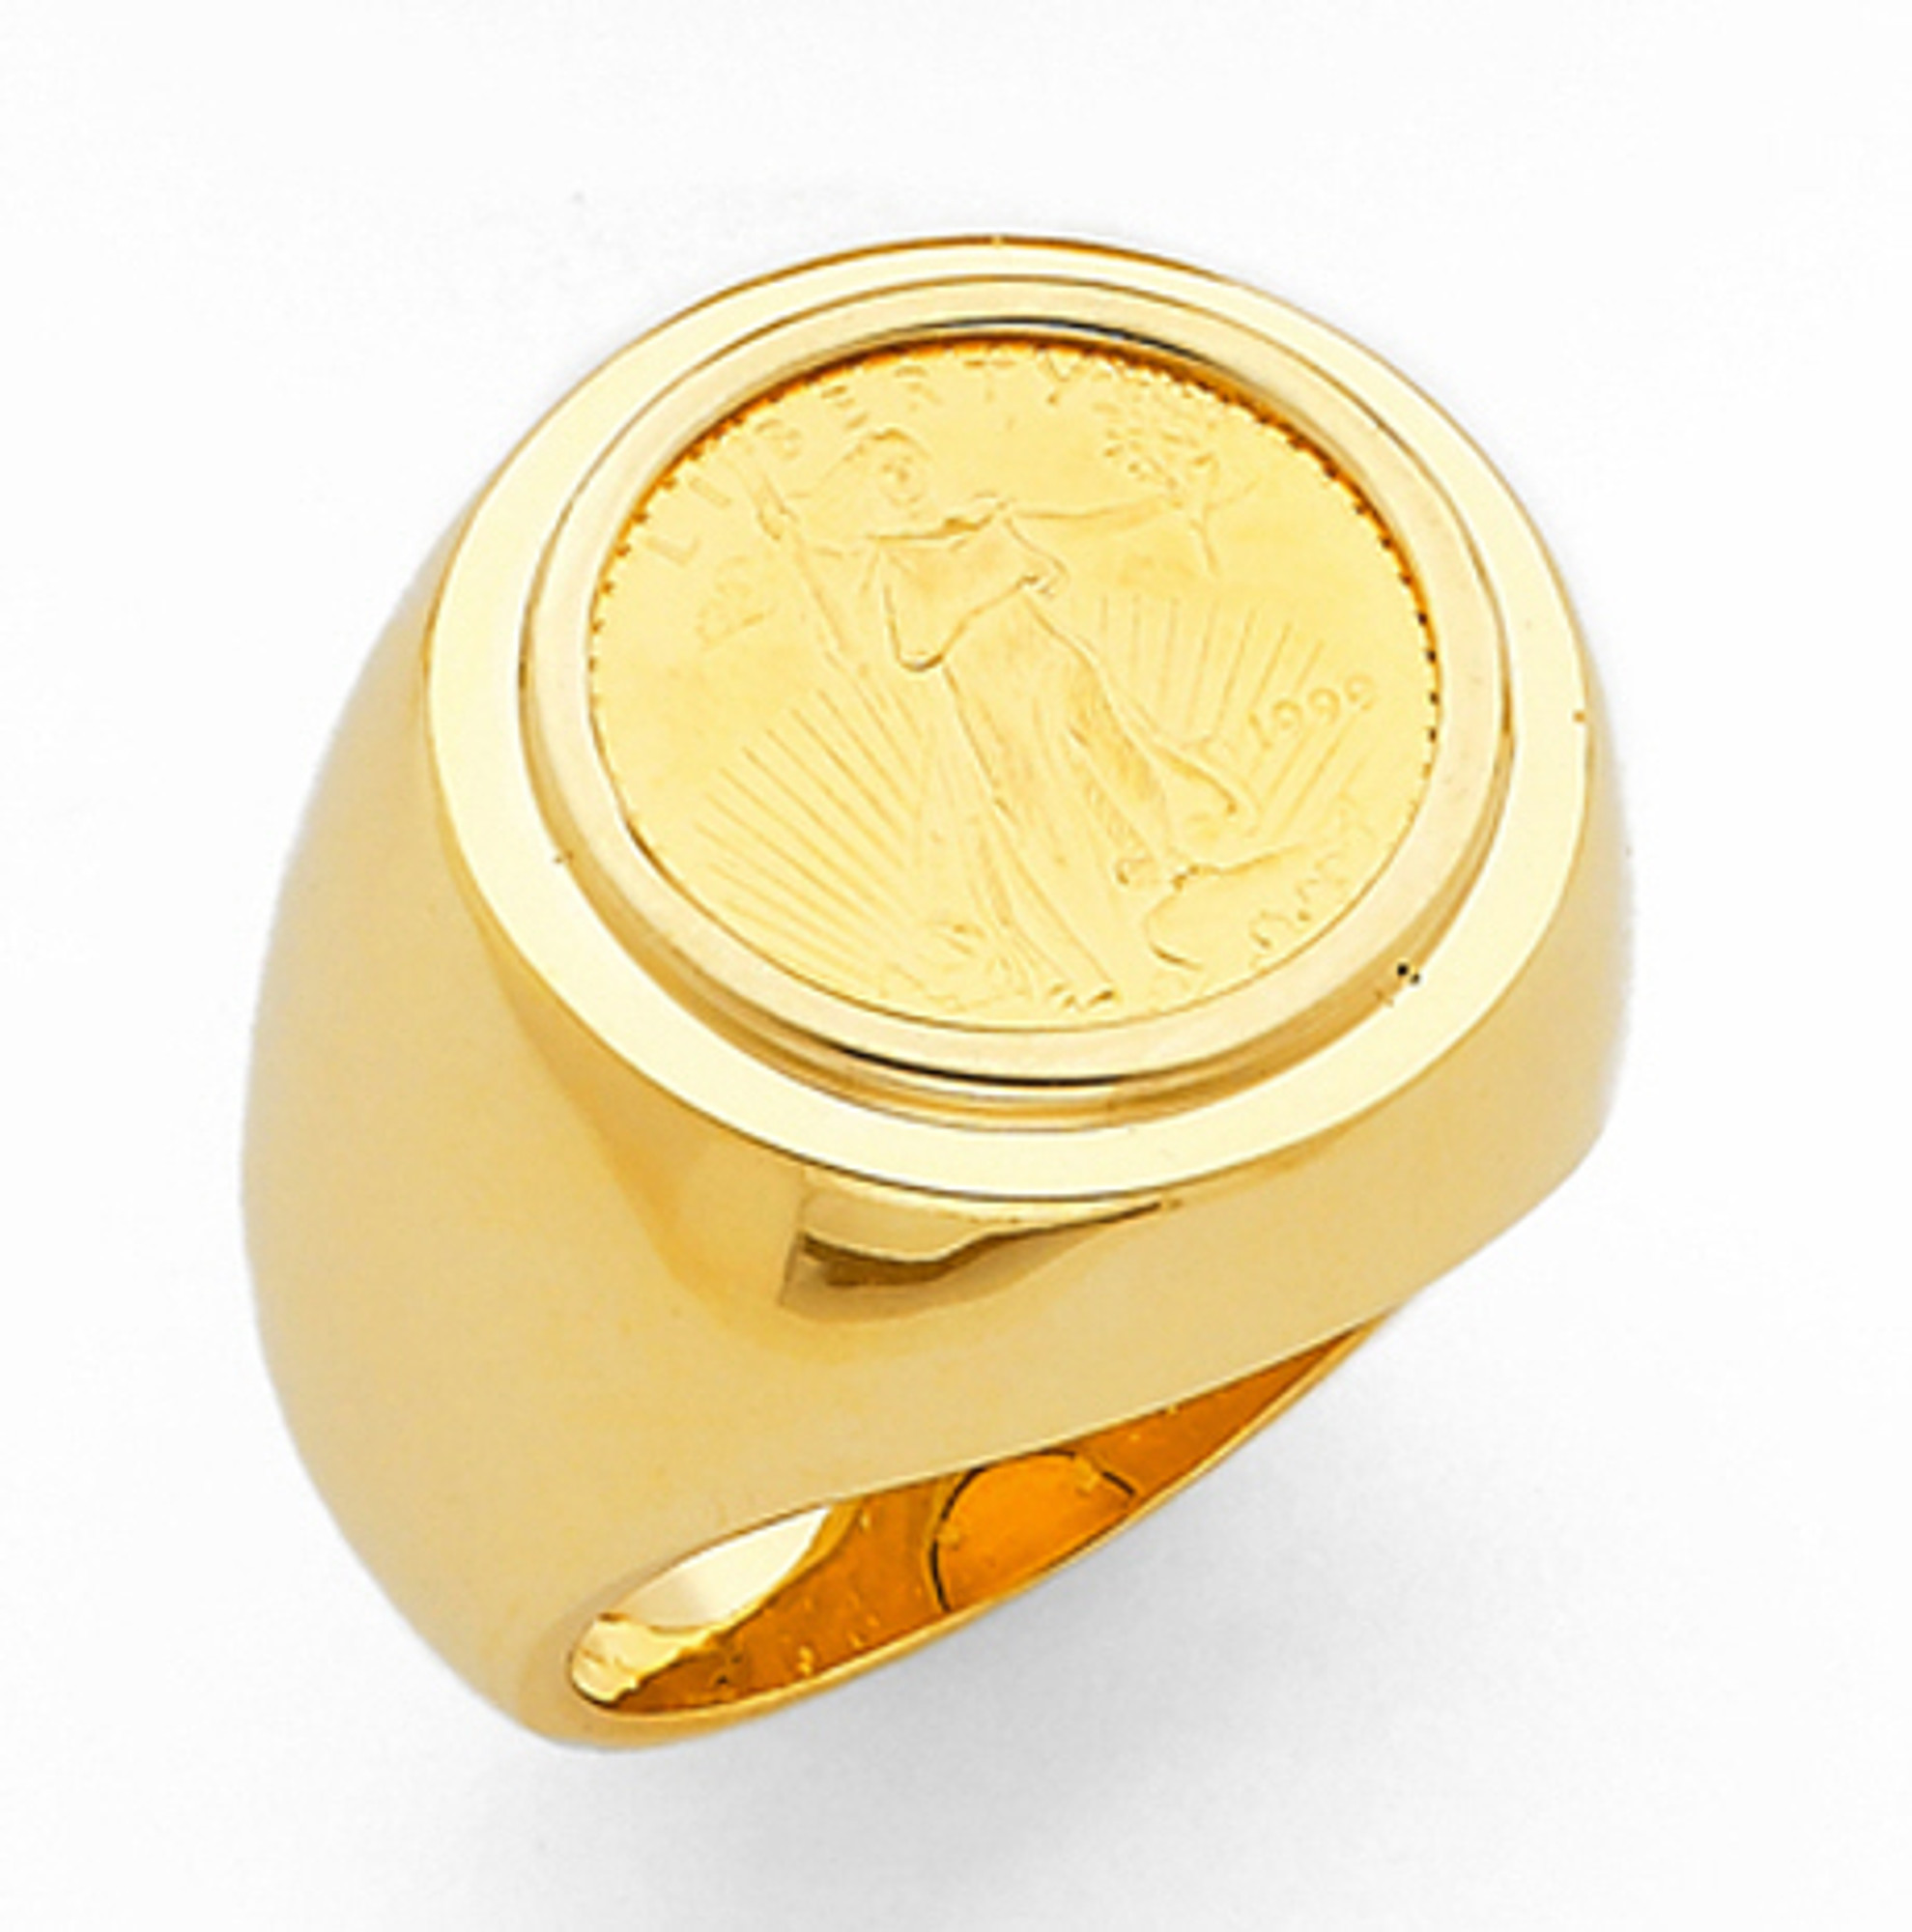 Distinct Engraved Coin 21k Gold Ring | Coin ring, Gold rings, Yellow gold  rings